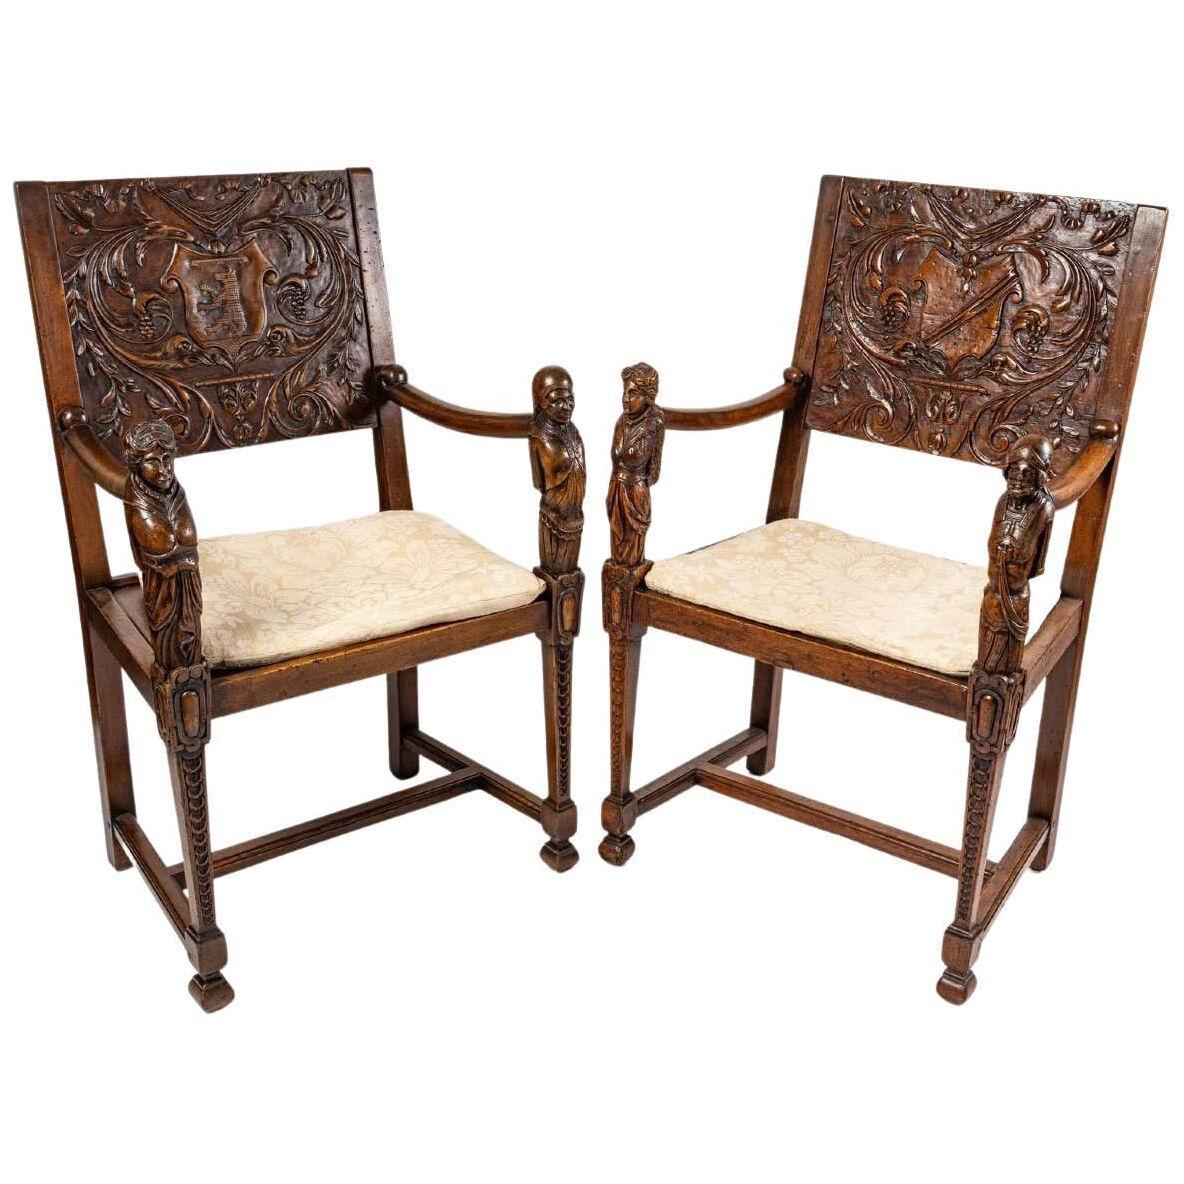 Pair of neo-gothic Solid Walnut Ceremonial Chairs